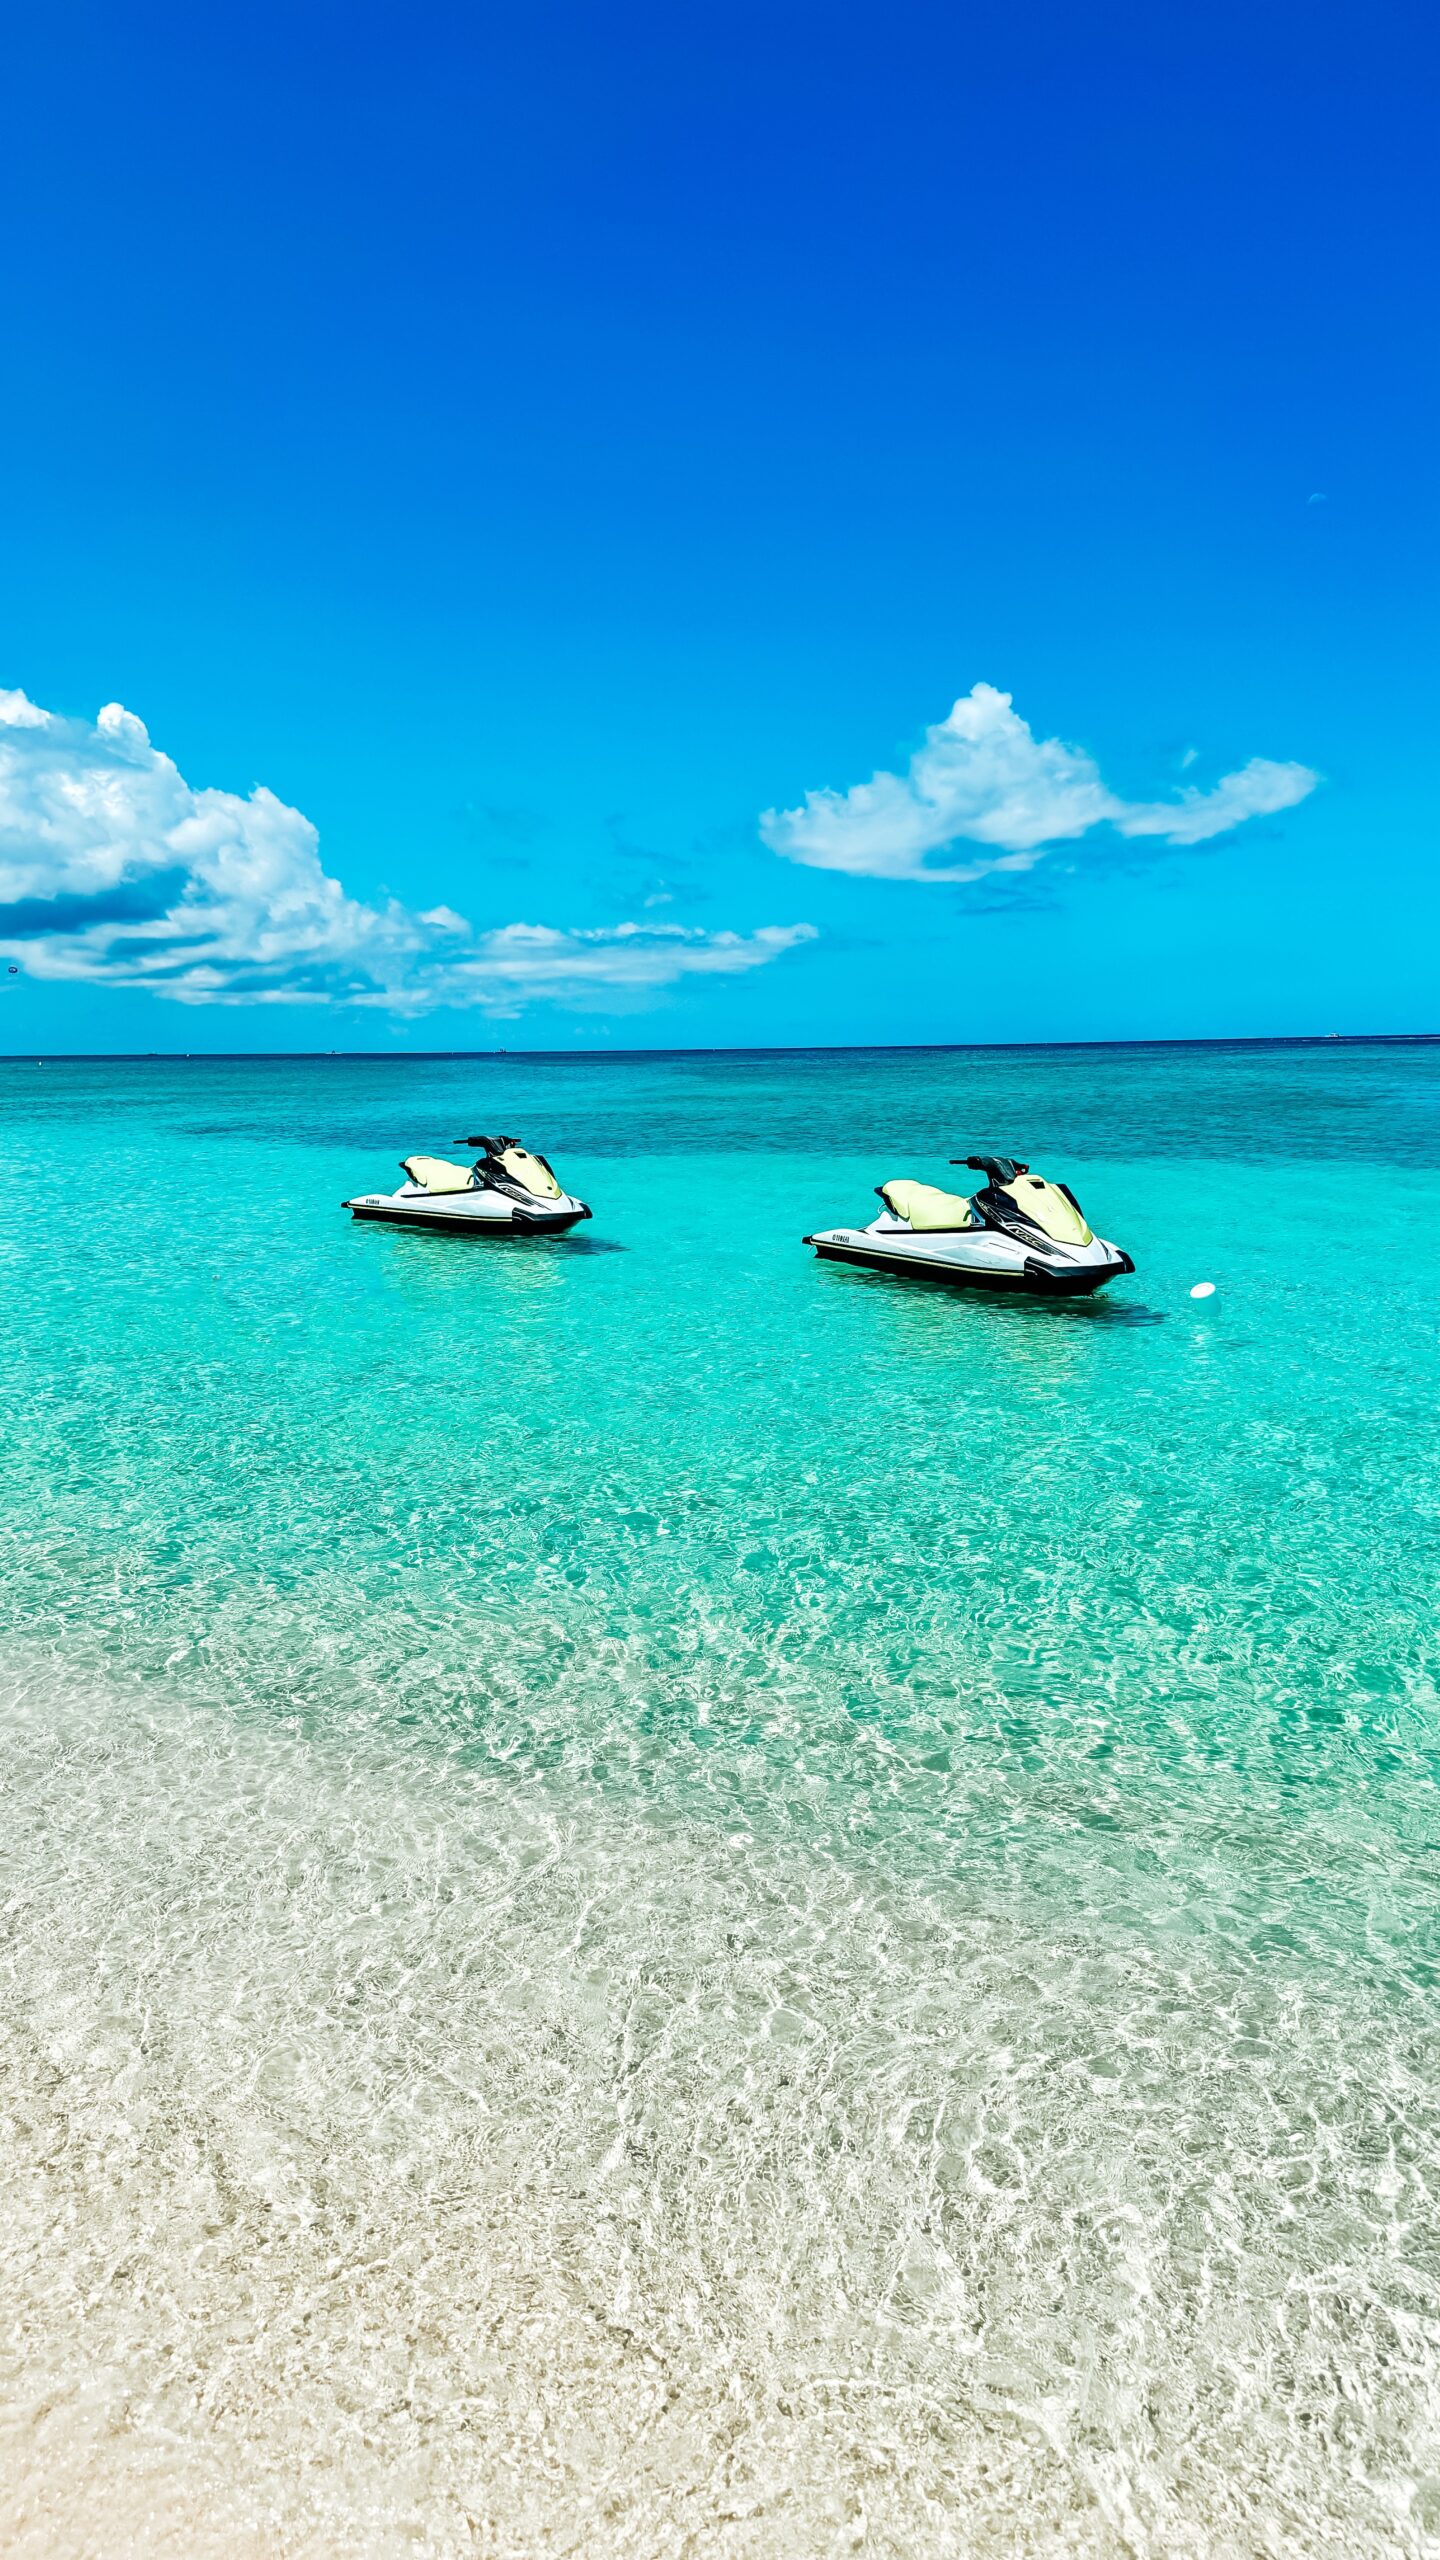 Jet skis sit waiting for renters in the shallow waters of Seven Mile Beach in Grand Cayman